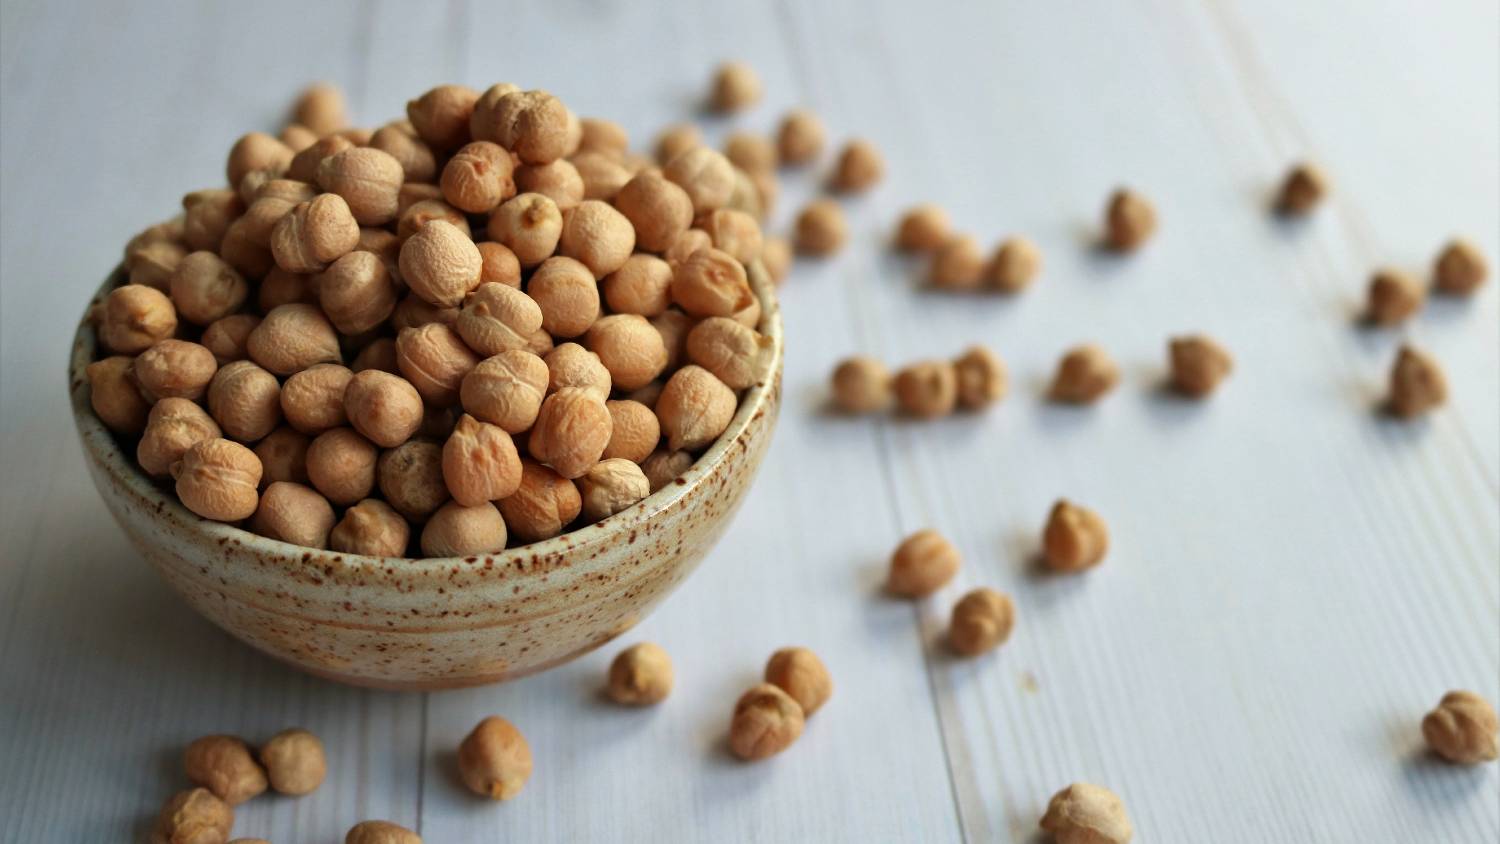 An old Iranian tradition of throwing chickpeas to predict the future is still practiced by some in Bosnia (Public domain)